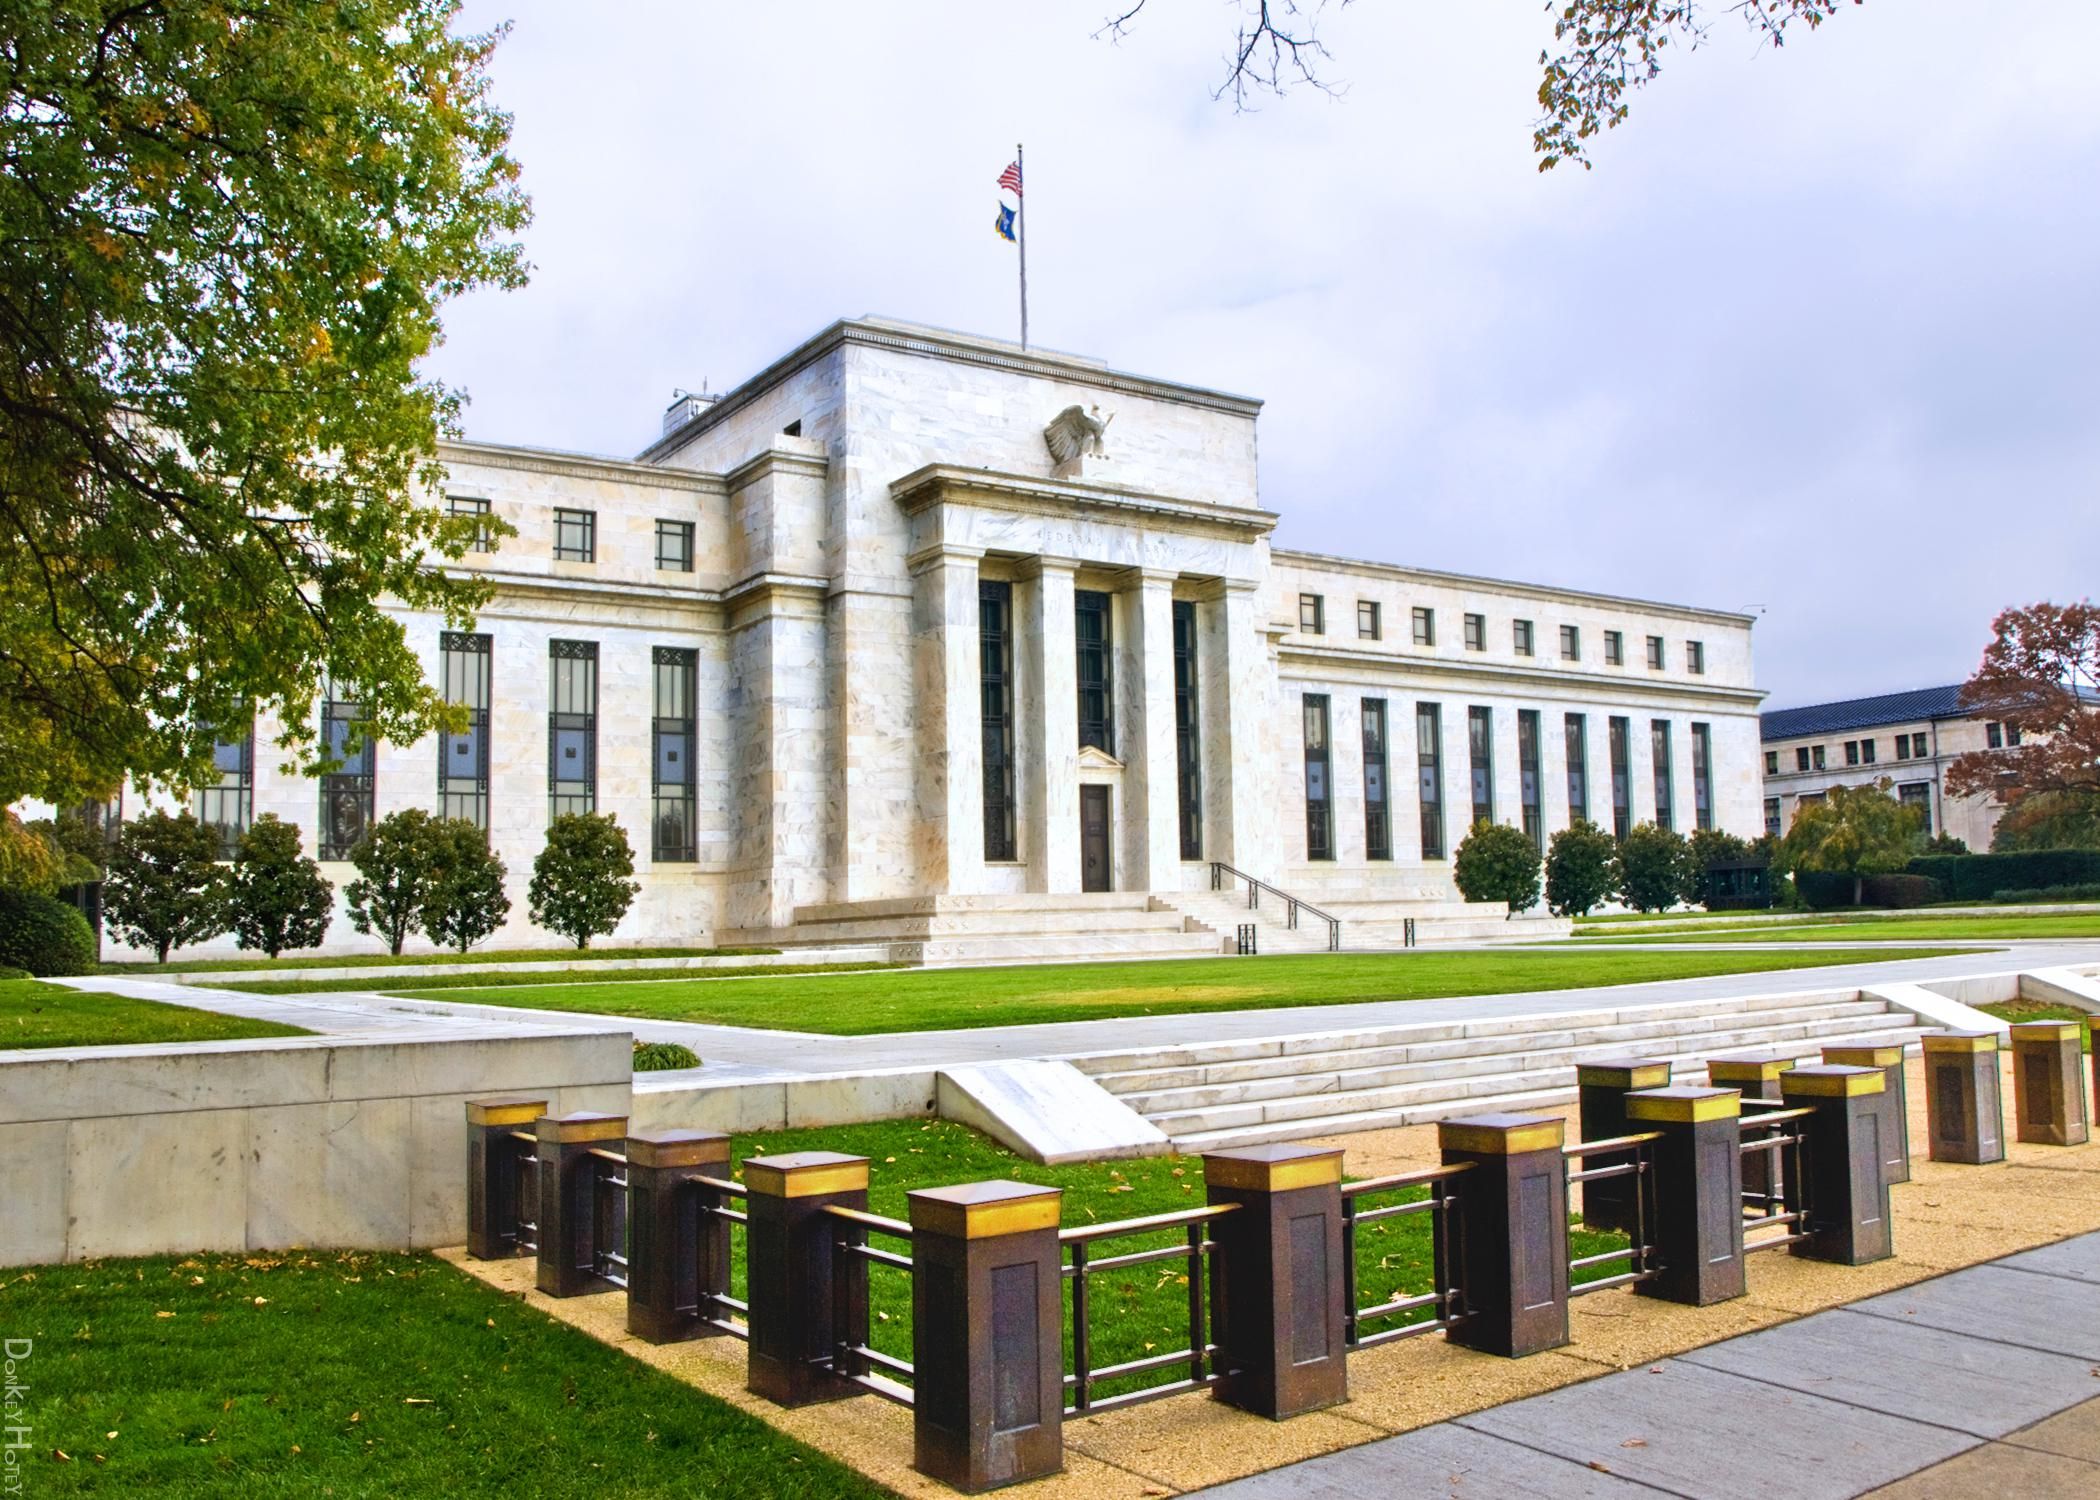 The facade of the Federal Reserve building in Washington D.C.